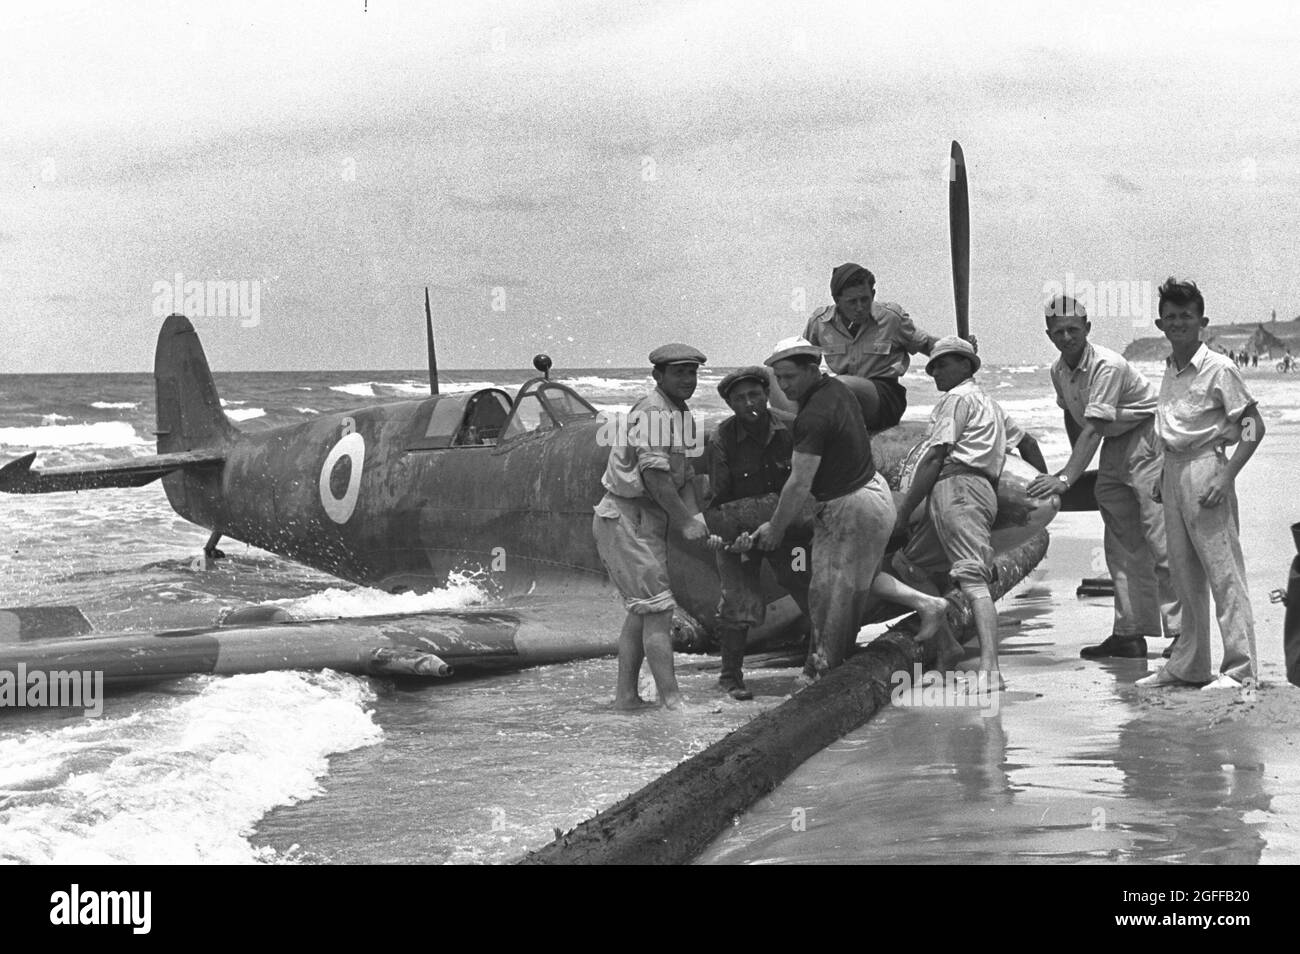 Israel War of Independence - In the photo, an Egyptian plane shot down in Tel Aviv during the raid on the city - May 15, 1948 Stock Photo